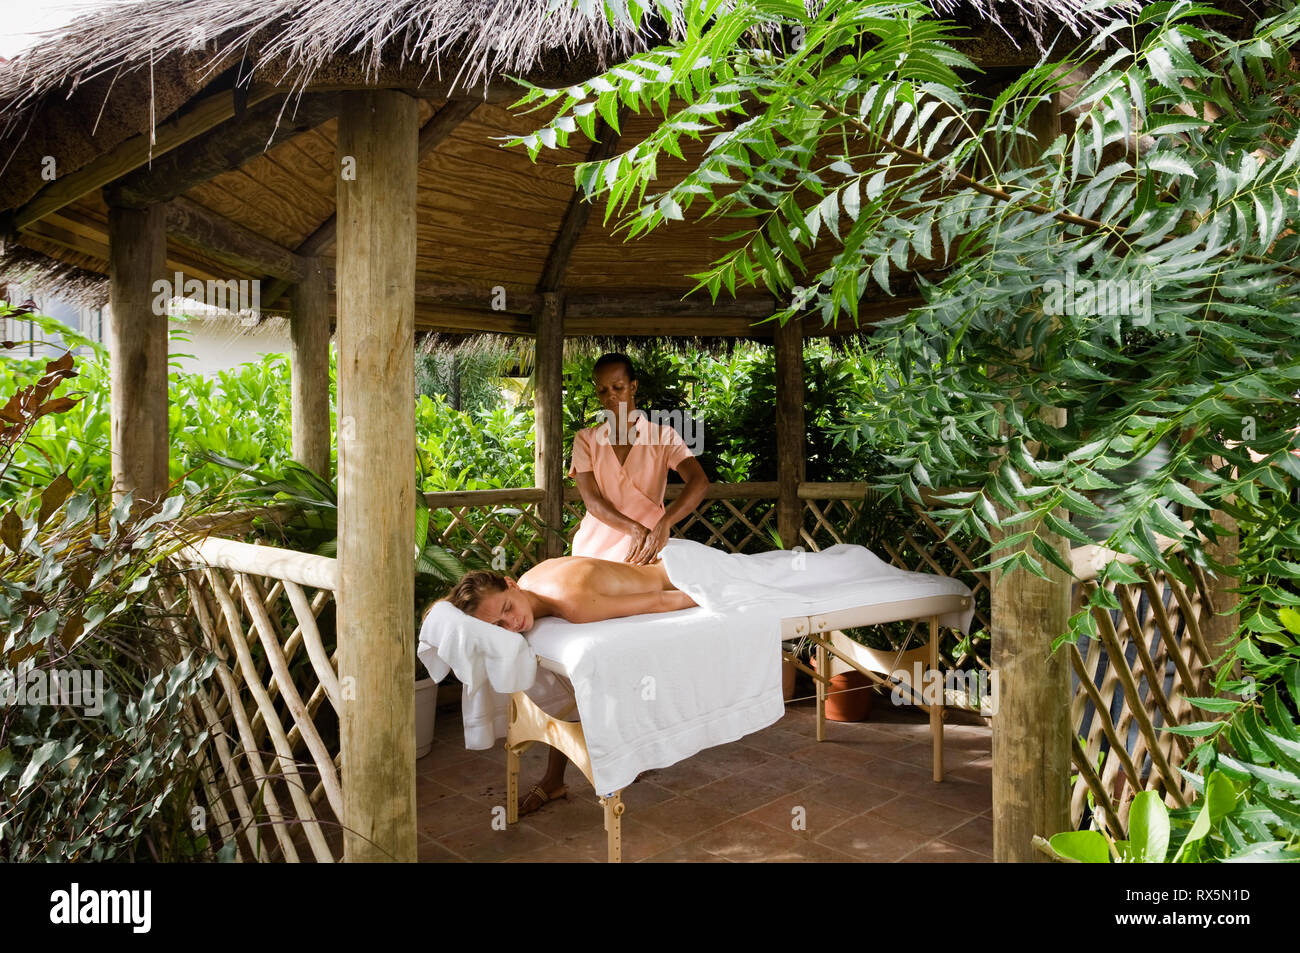 Woman receiving massage in thatched gazebo Stock Photo